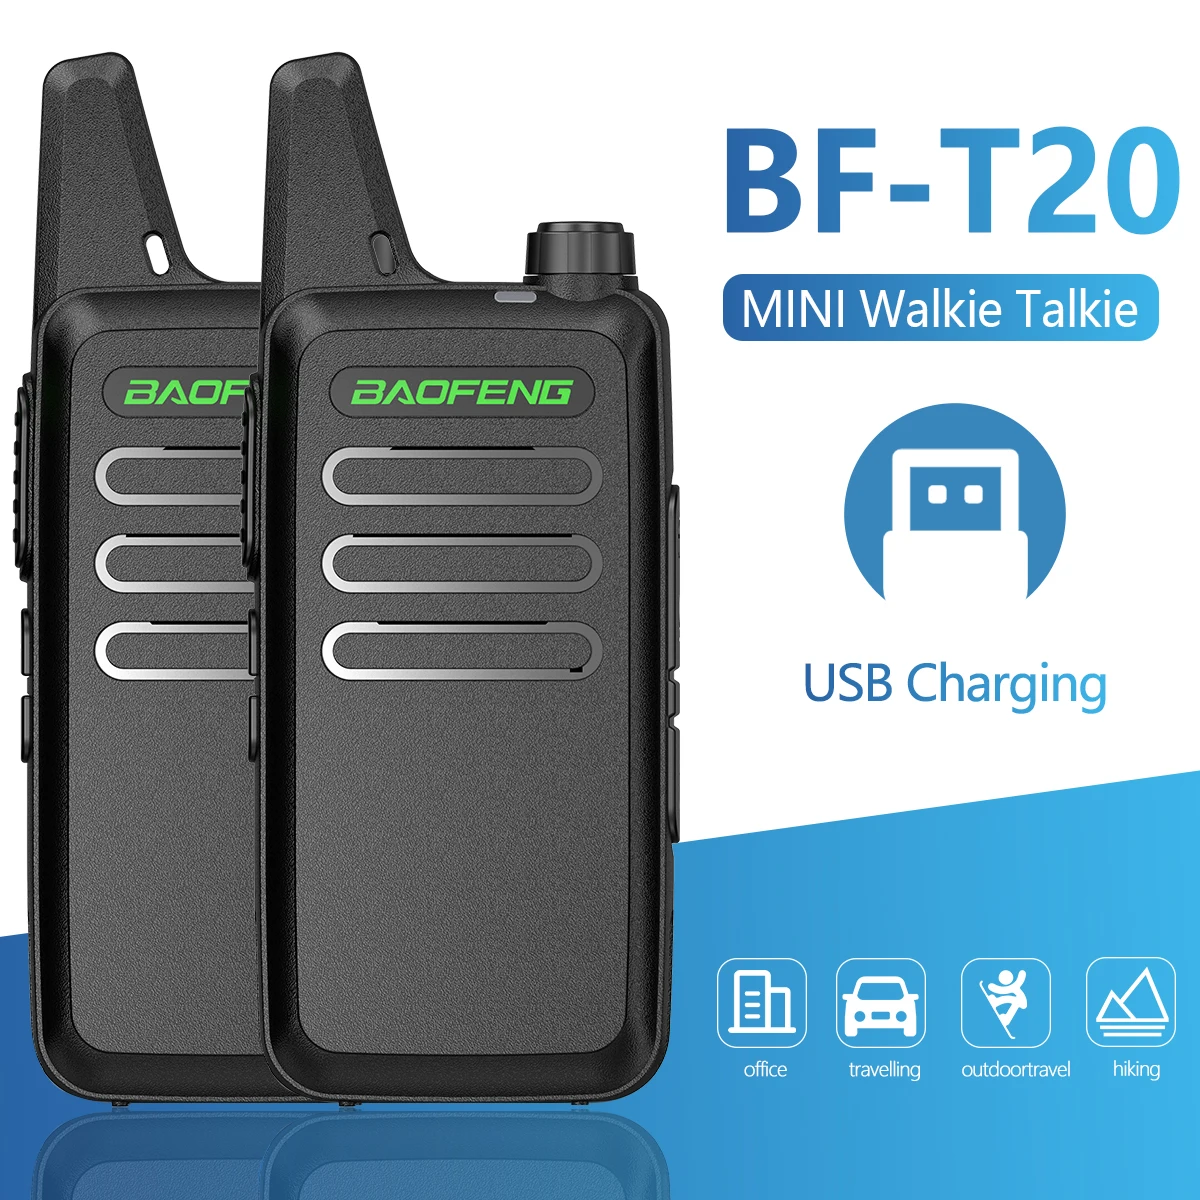 1 or 2pcs Baofeng BF-T20 Mini Walkie Talkie UHF 400-470mHz Support USB Charging 16 Channels Ham CB Portable Radio BF-888S